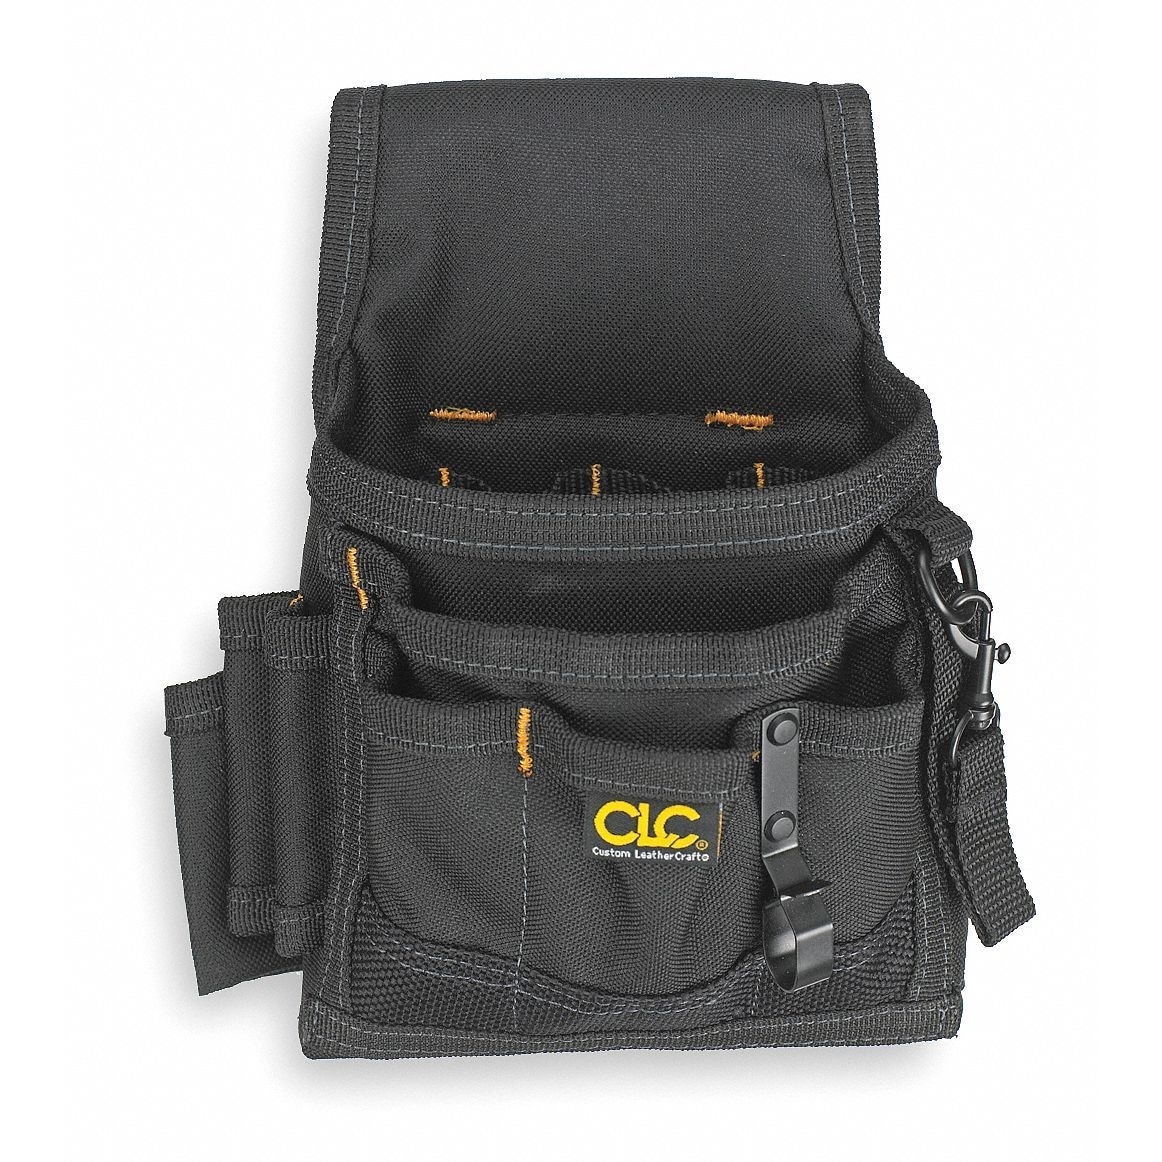 Clc Work Gear Black,Tool Pouch,Polyester 1503 - 1 ...